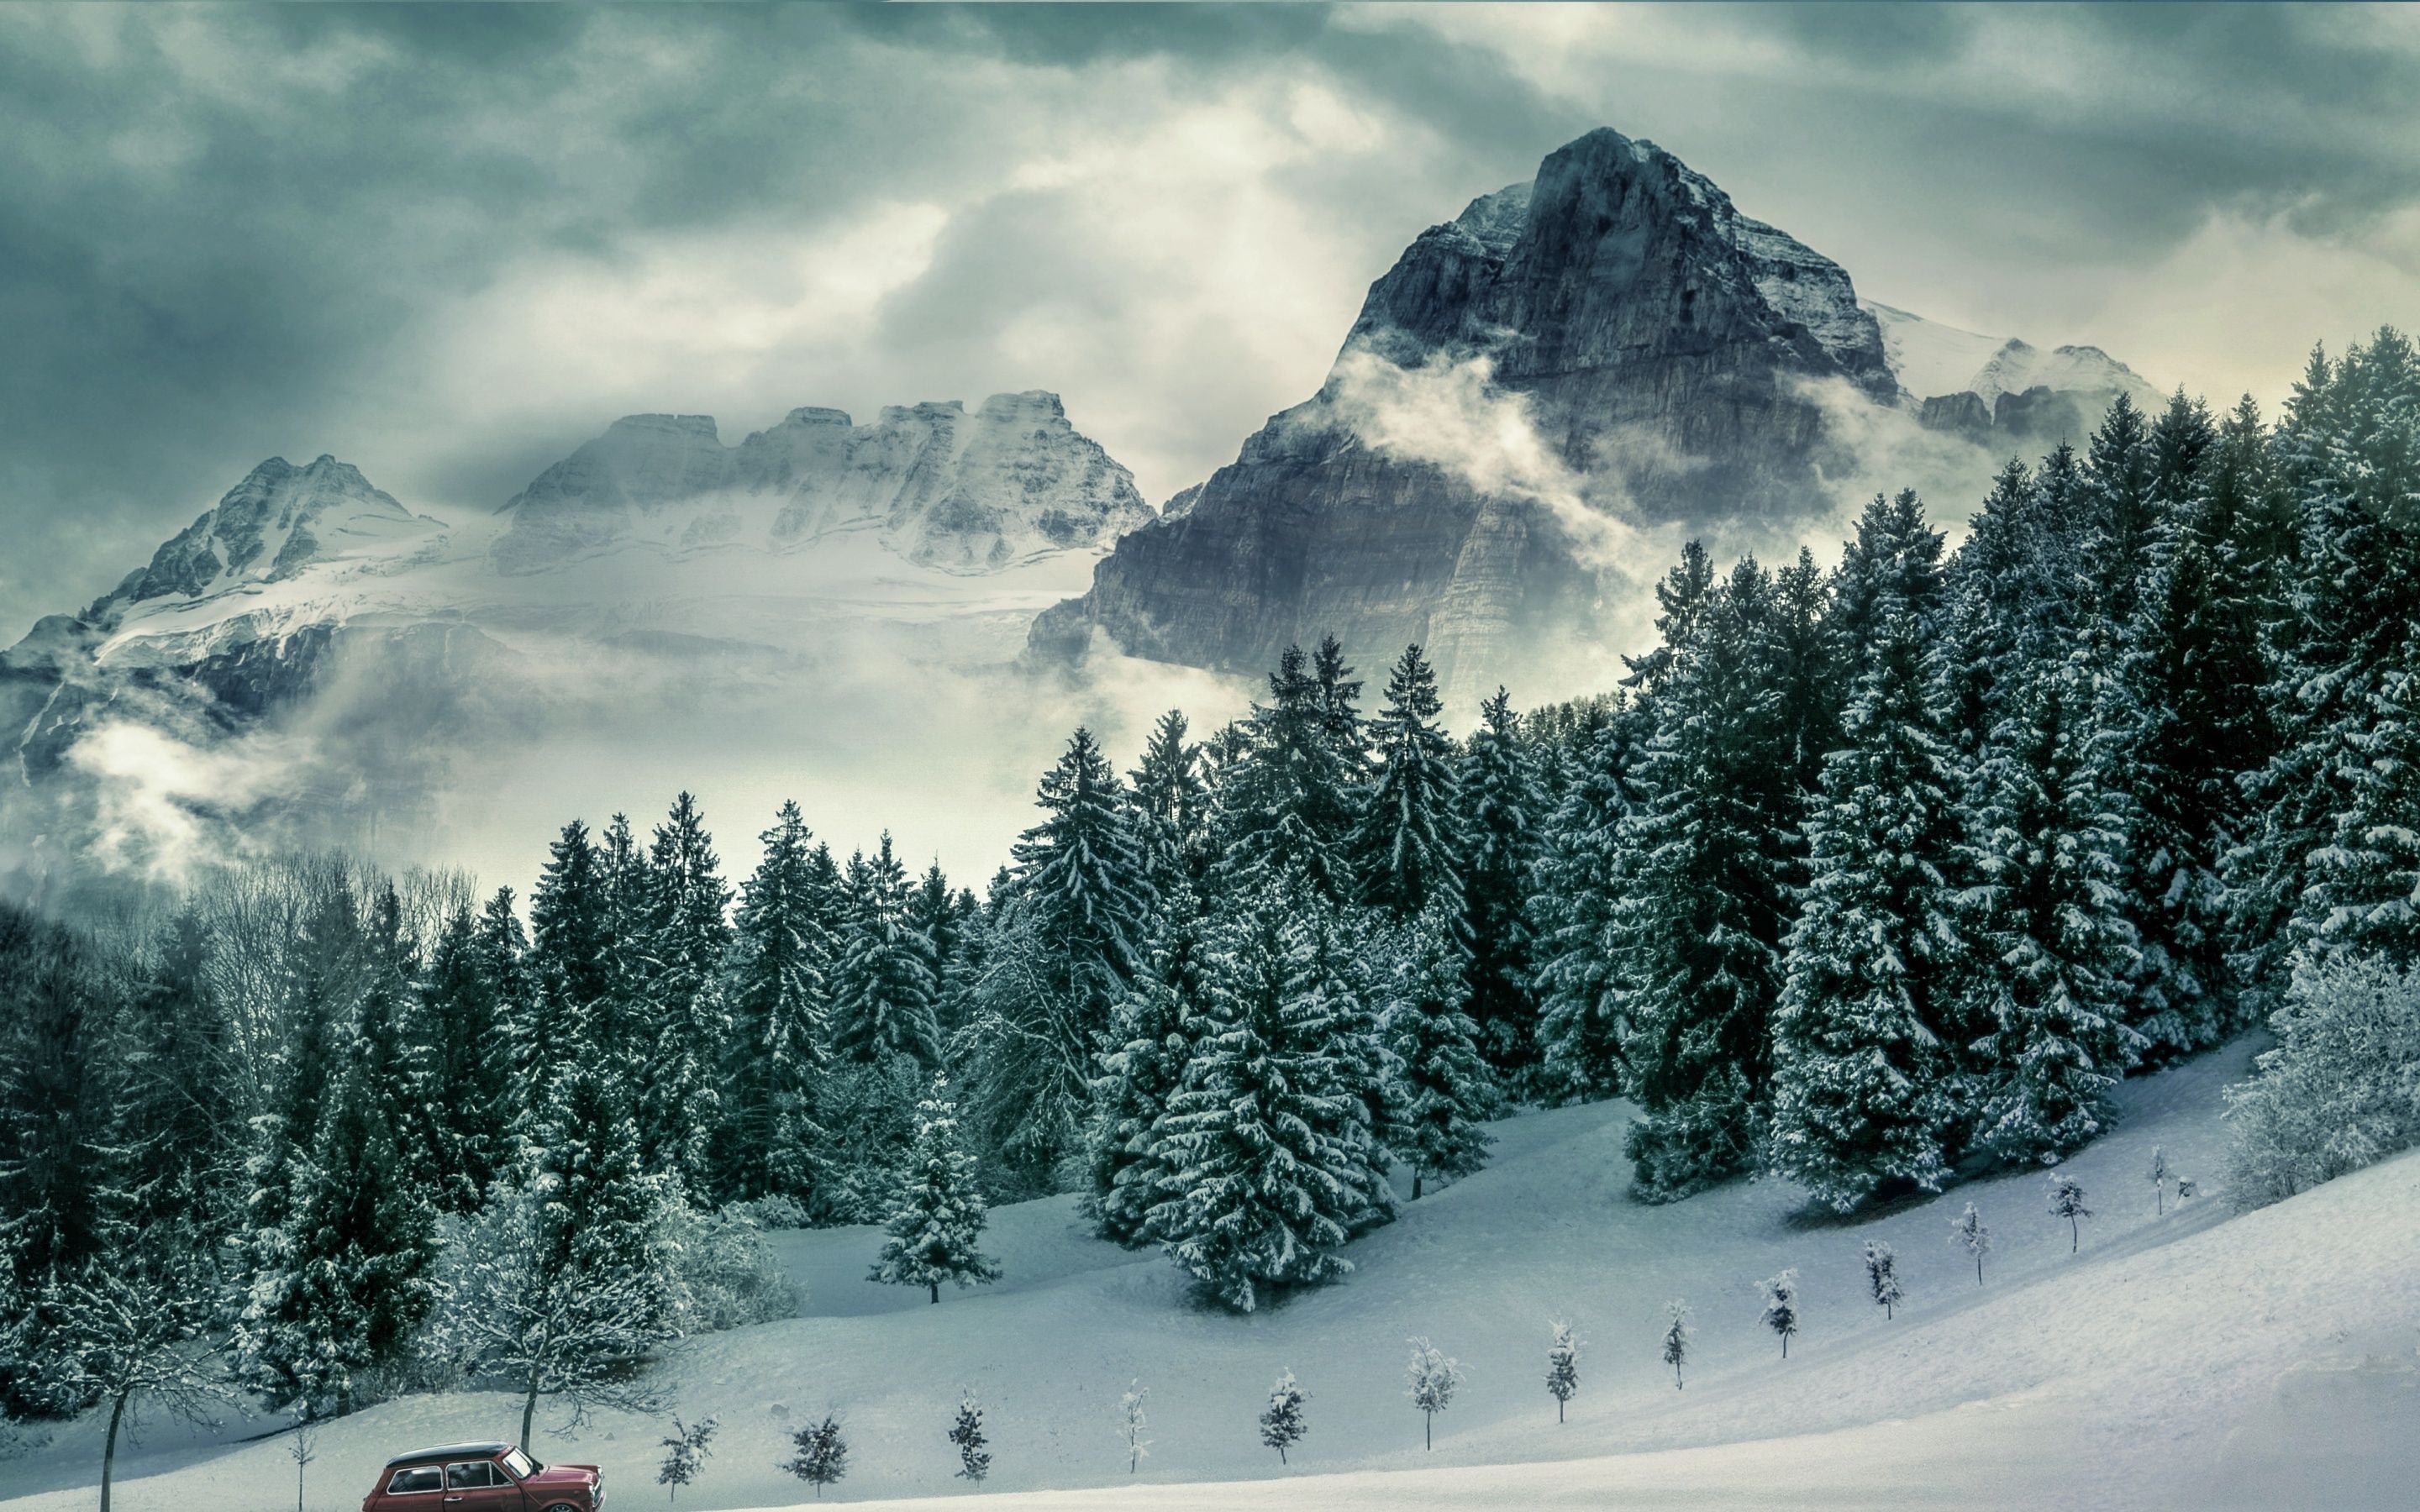 A car is parked on a snowy hillside with trees and mountains in the background. - Forest